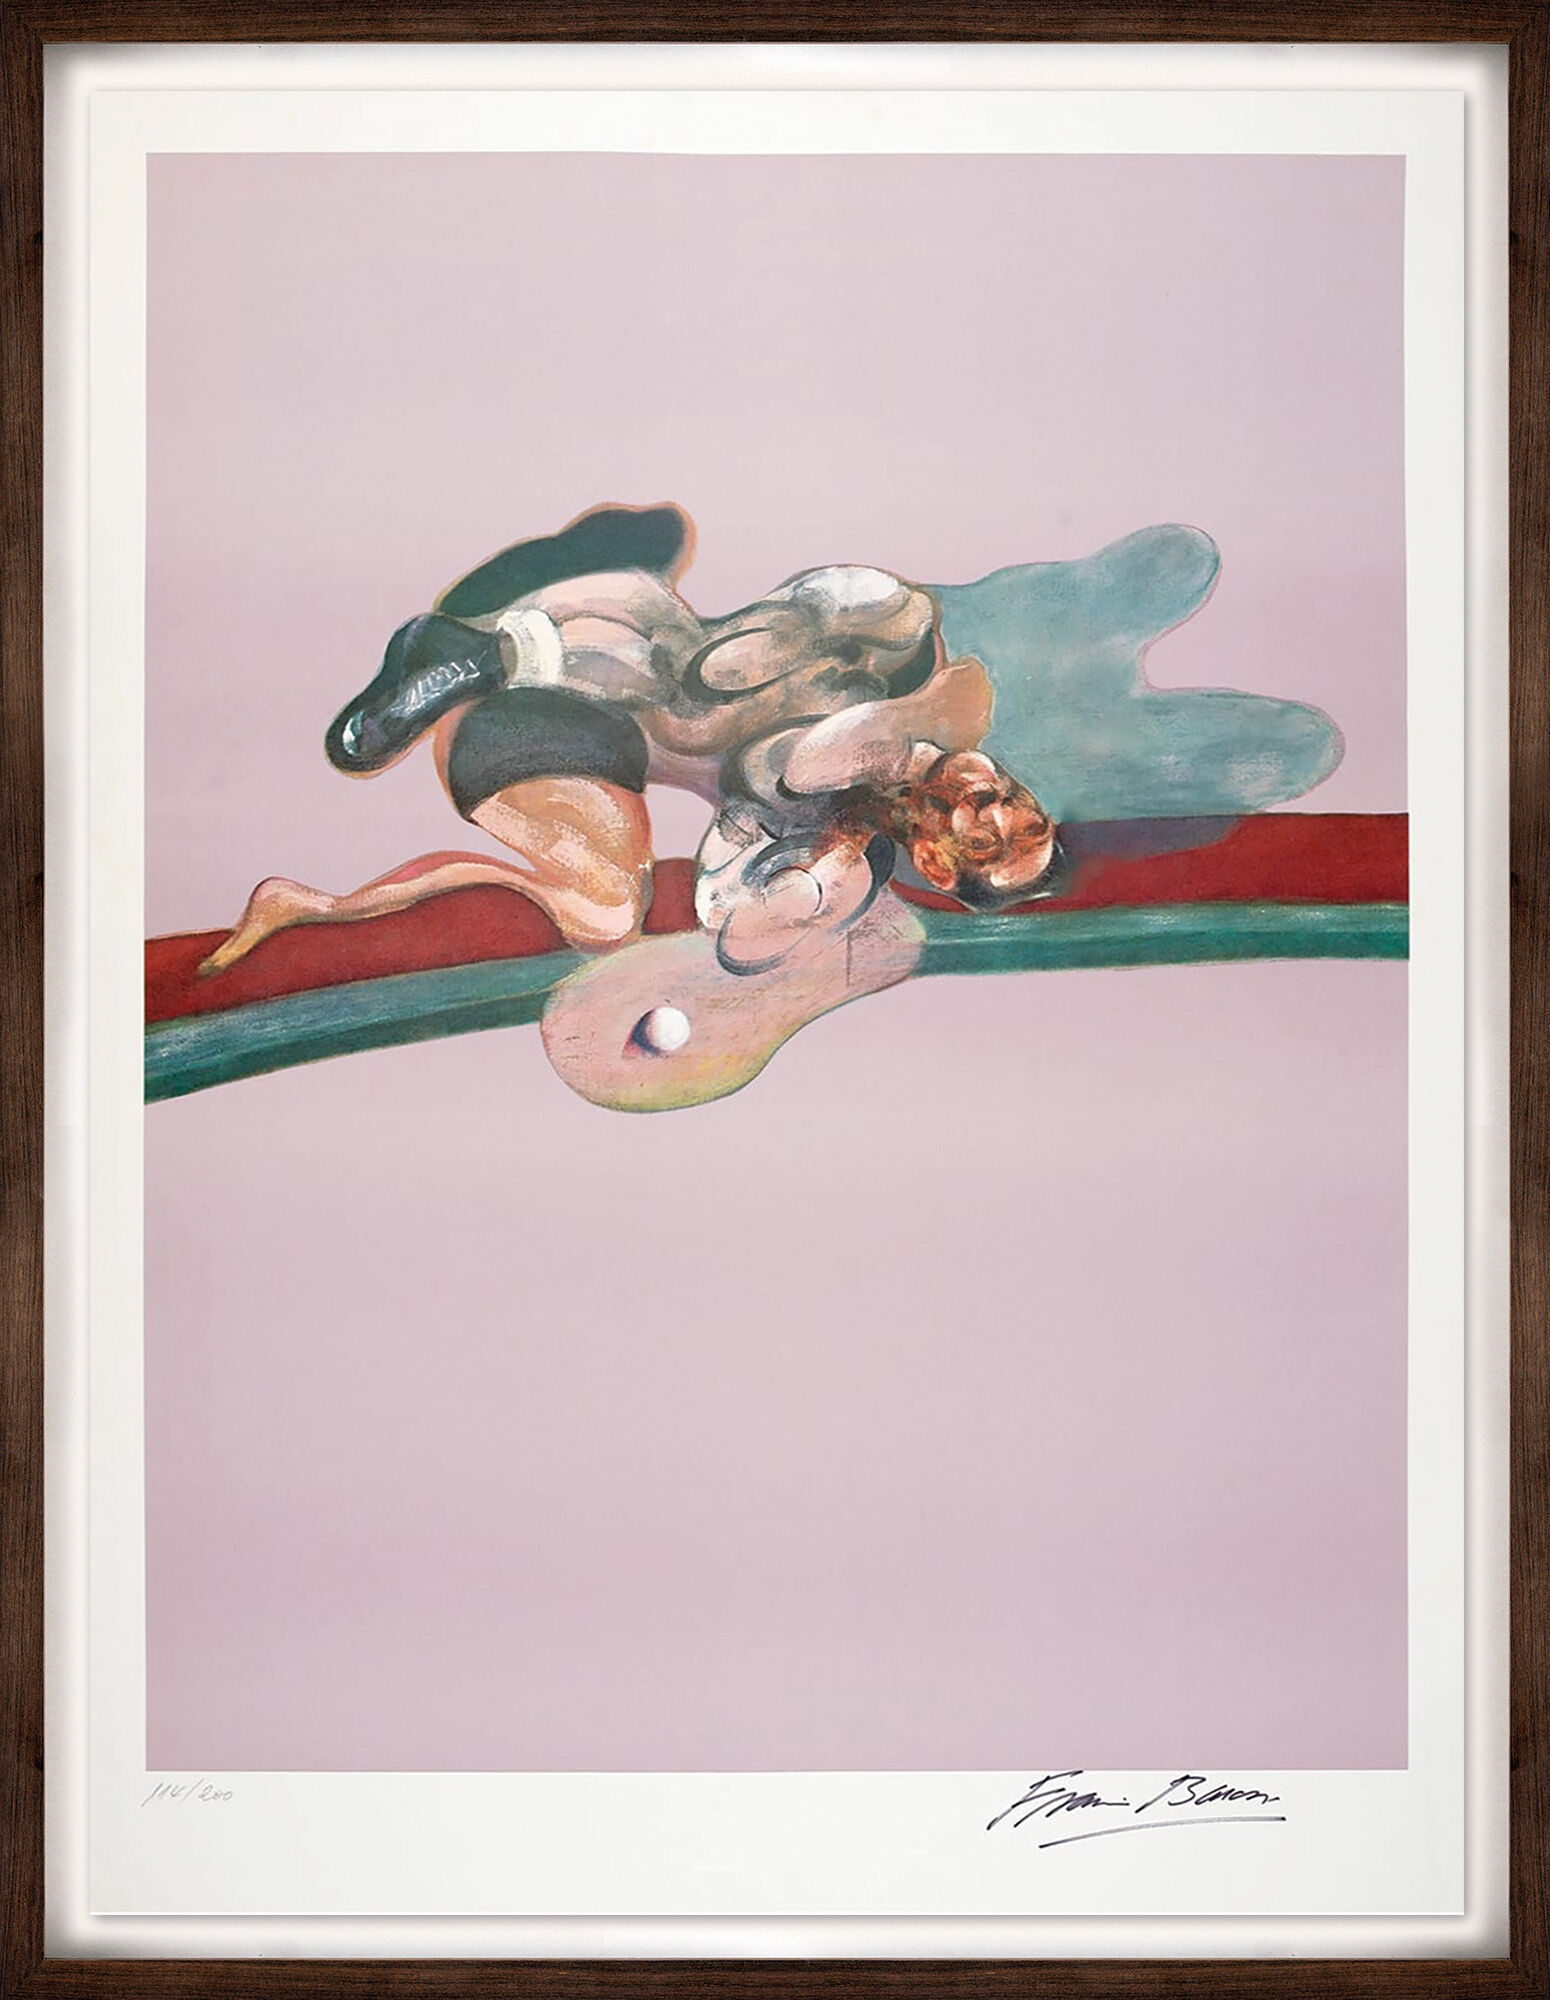 Picture "In Memory of George Dyer" (1976) by Francis Bacon